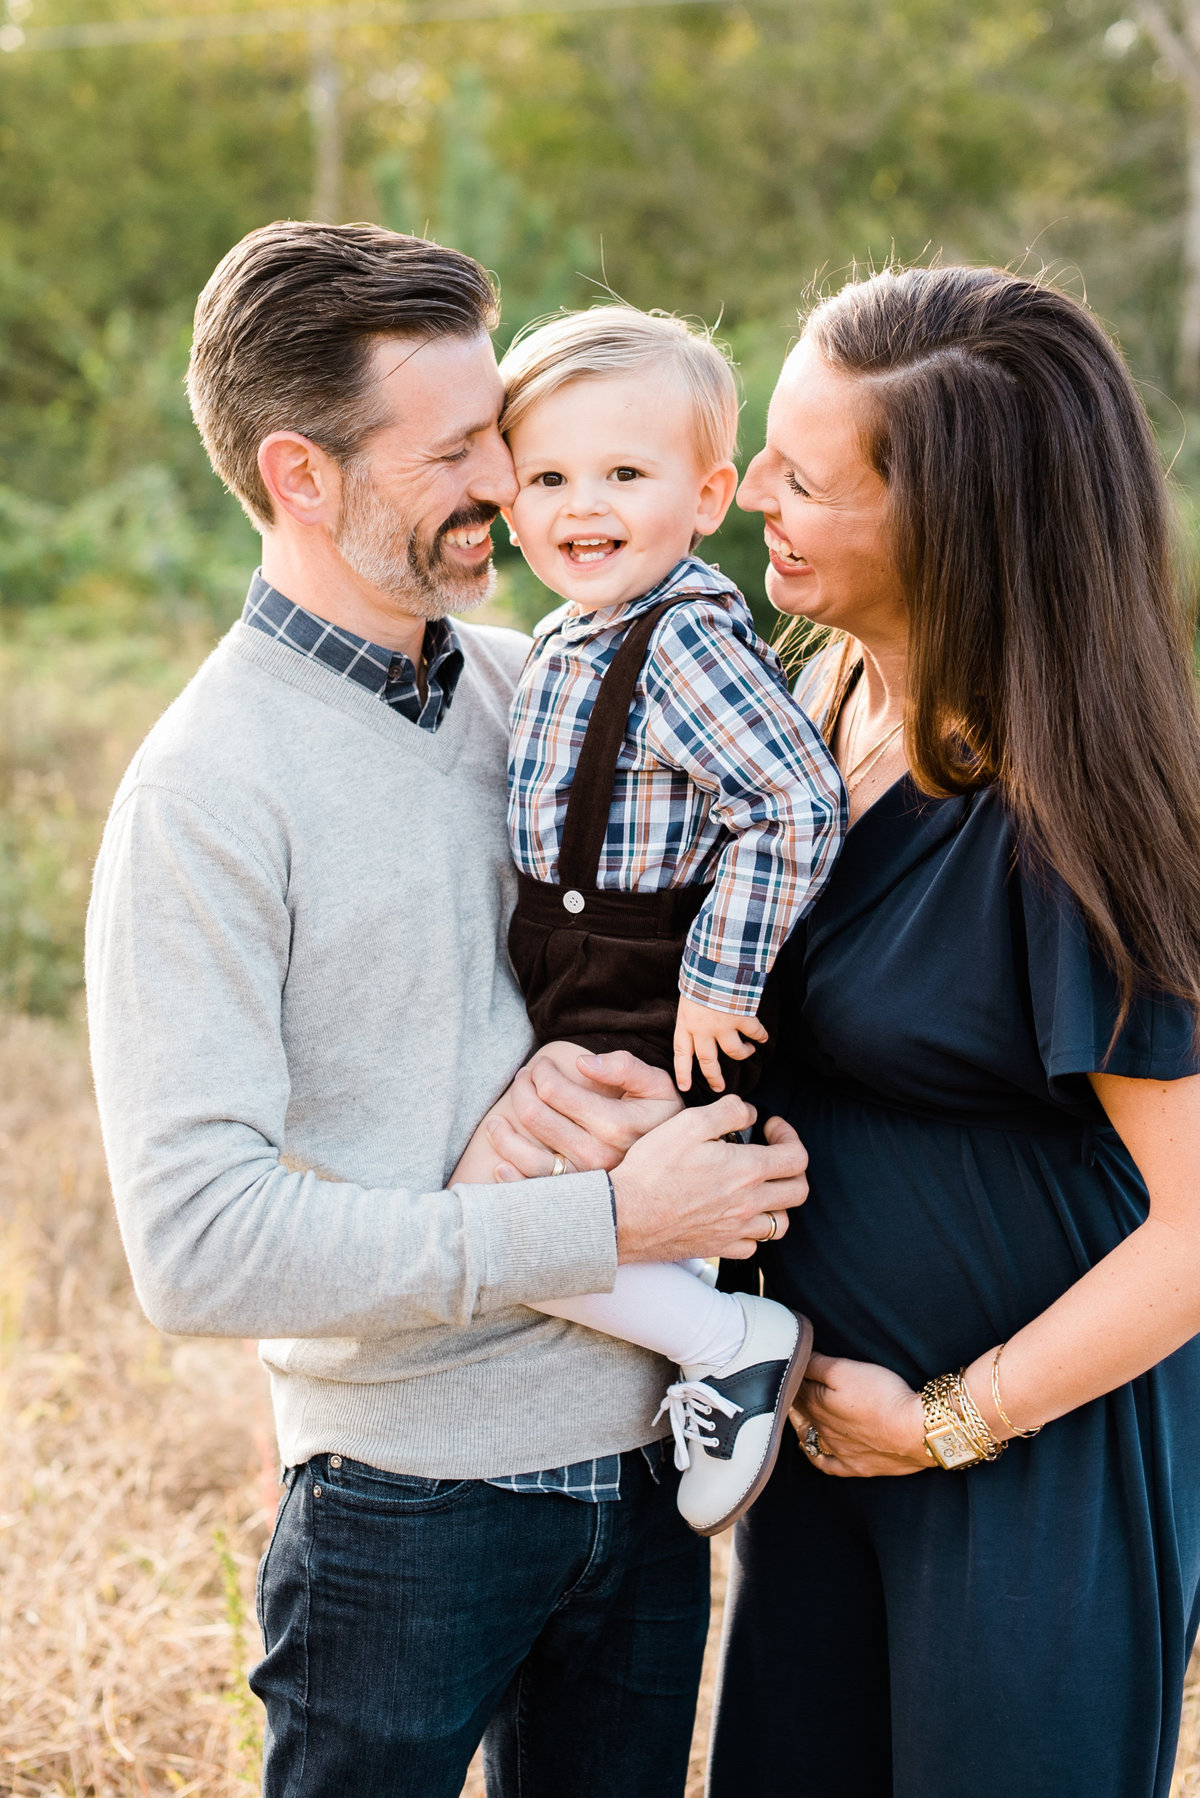 Pregnant mom and her husband hold their toddler and laugh during a Raleigh maternity photo session. Photographed by Raleigh NC Family Photographer A.J. Dunlap Photography.